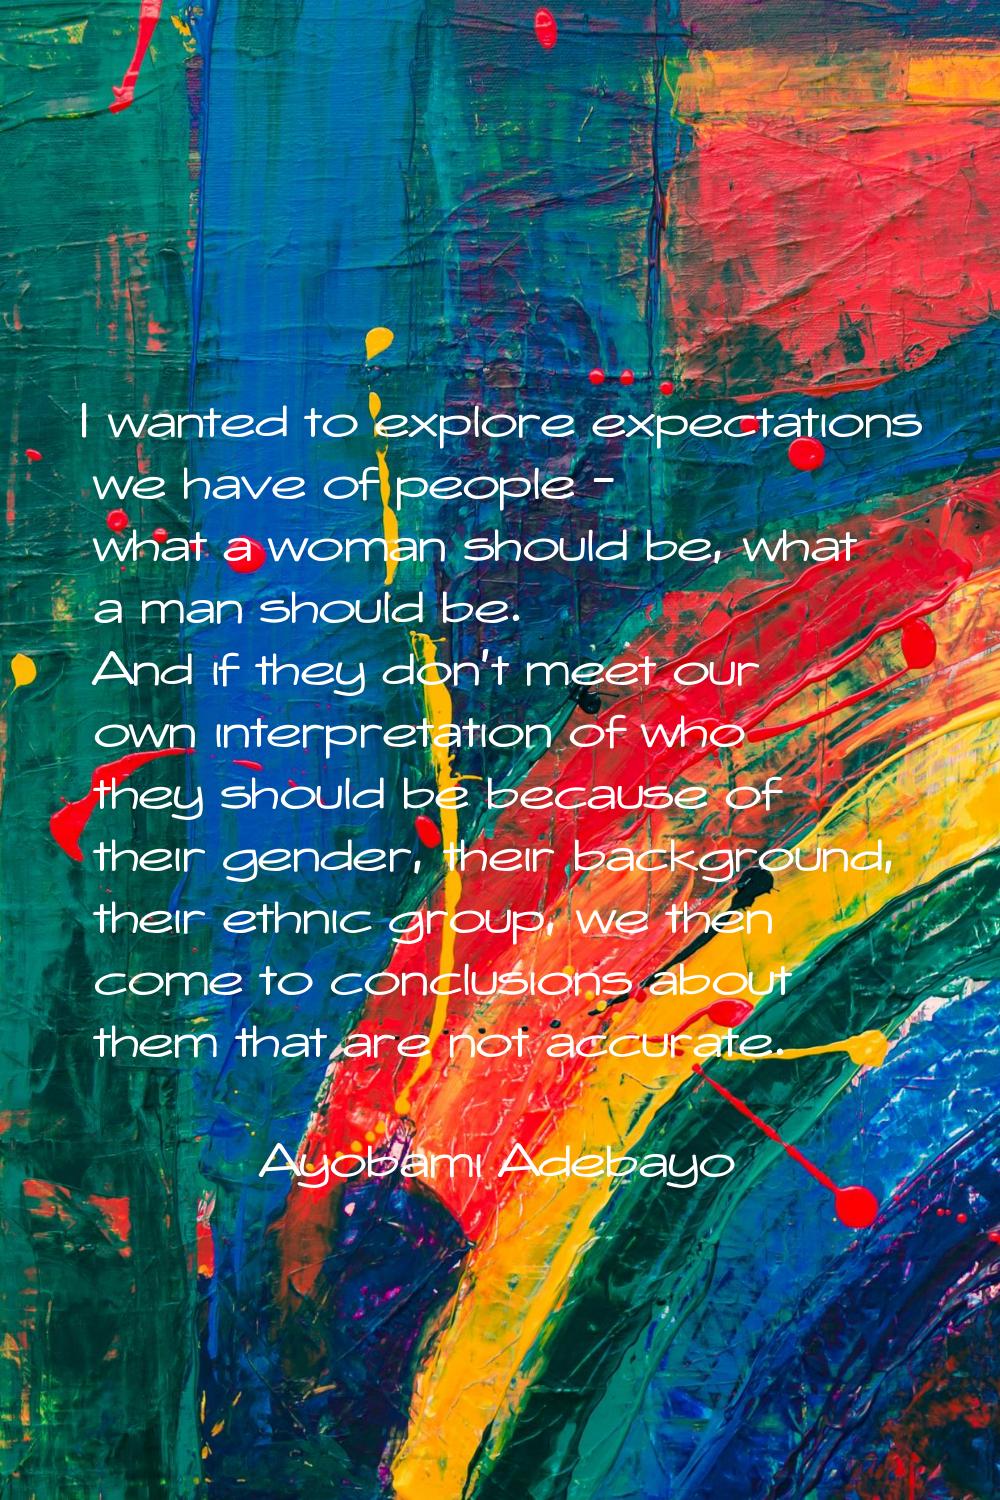 I wanted to explore expectations we have of people - what a woman should be, what a man should be. 